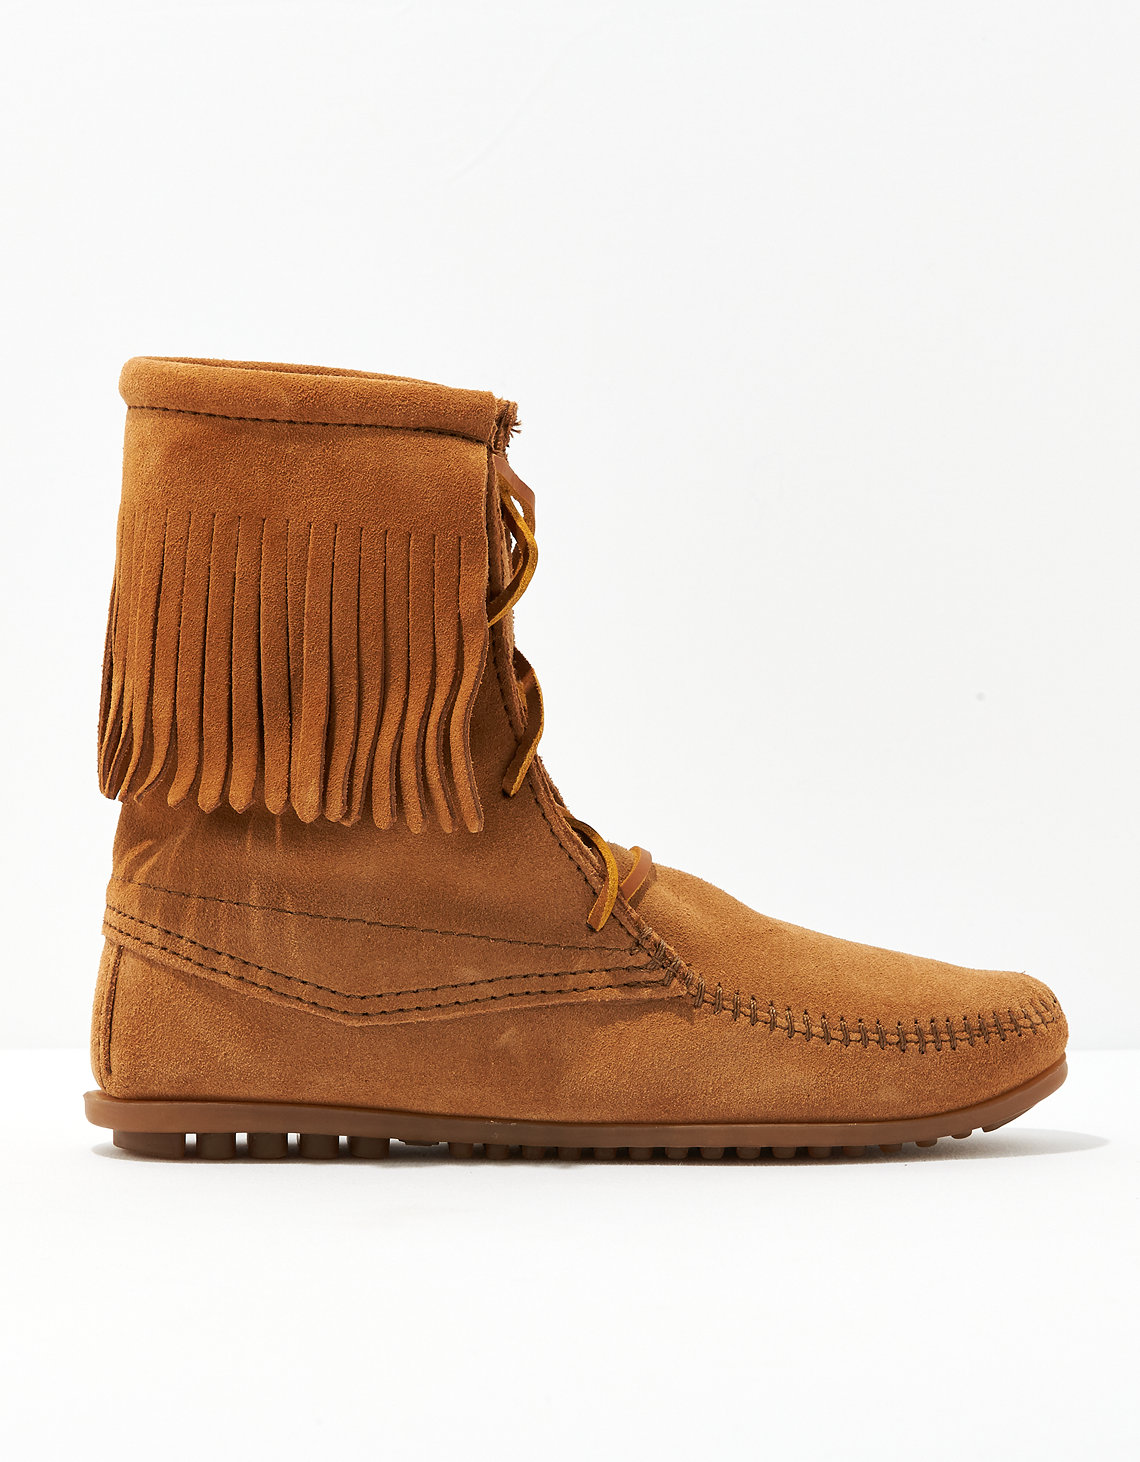 Minnetonka Tramper Bootie, Taupe | American Eagle Outfitters